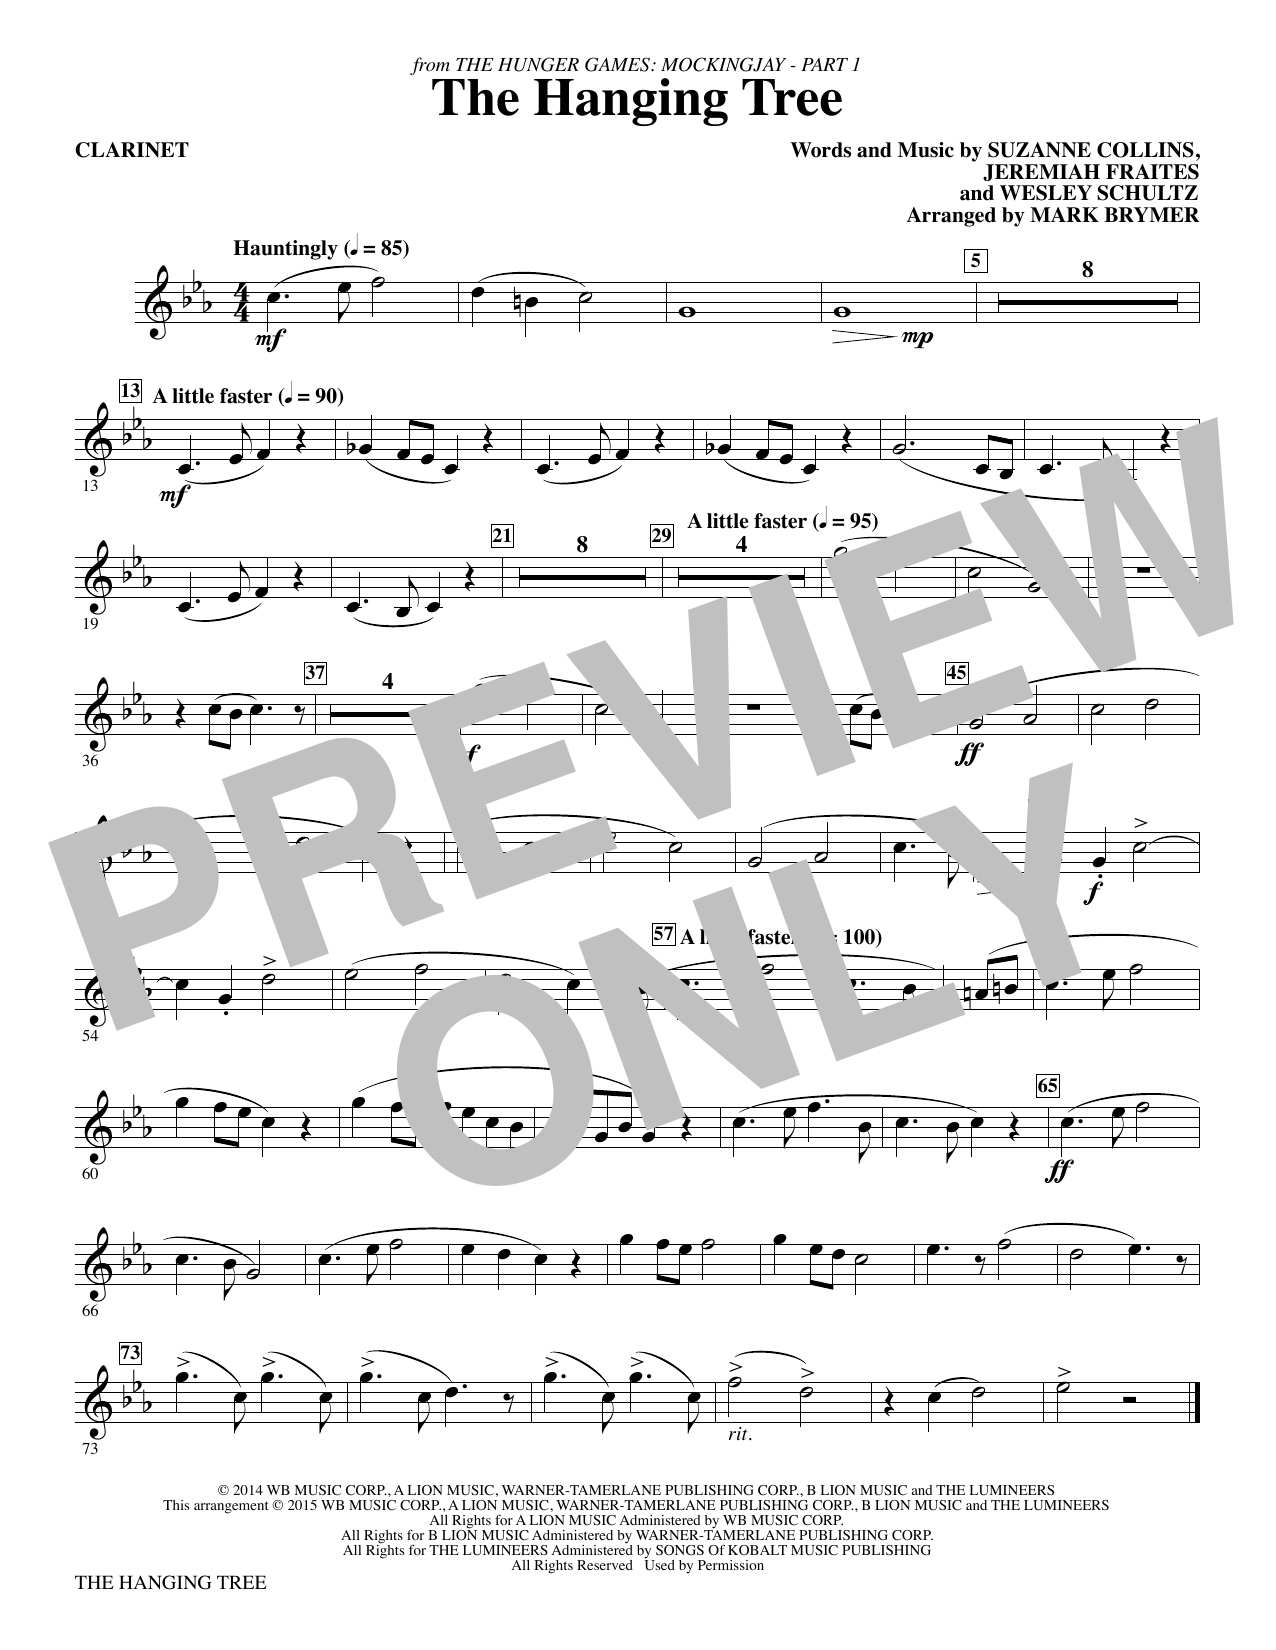 Mark Brymer The Hanging Tree (from The Hunger Games: Mockingjay Part I) - Bb Clarinet sheet music notes and chords. Download Printable PDF.